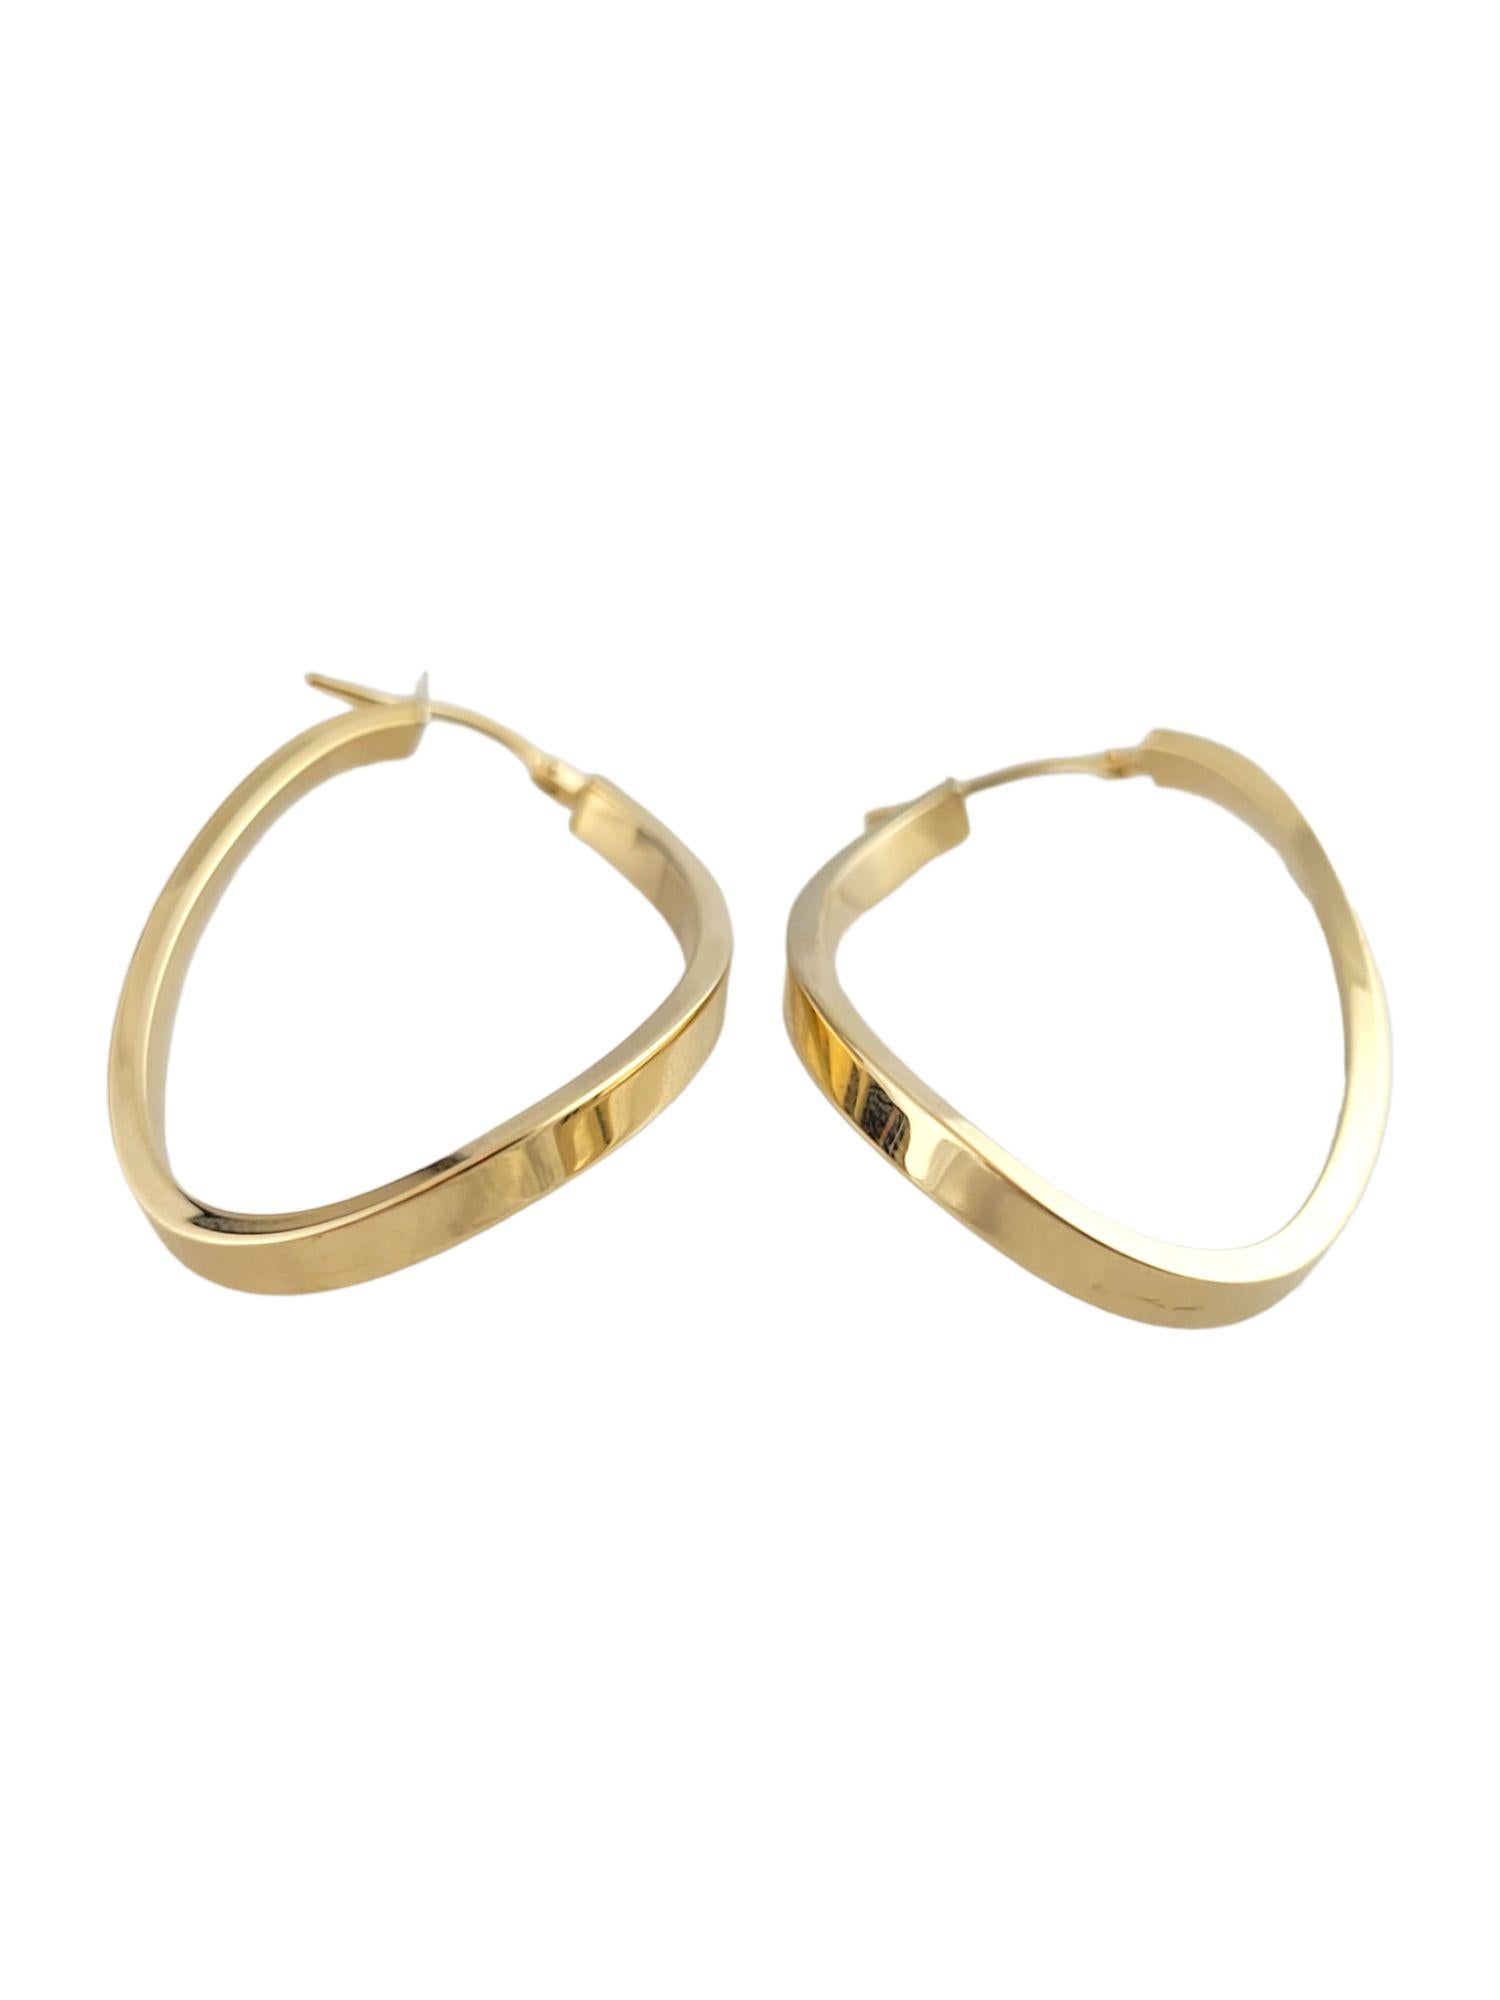 18K Yellow Gold Curved Oval Hoop Earrings #14795 In Good Condition For Sale In Washington Depot, CT